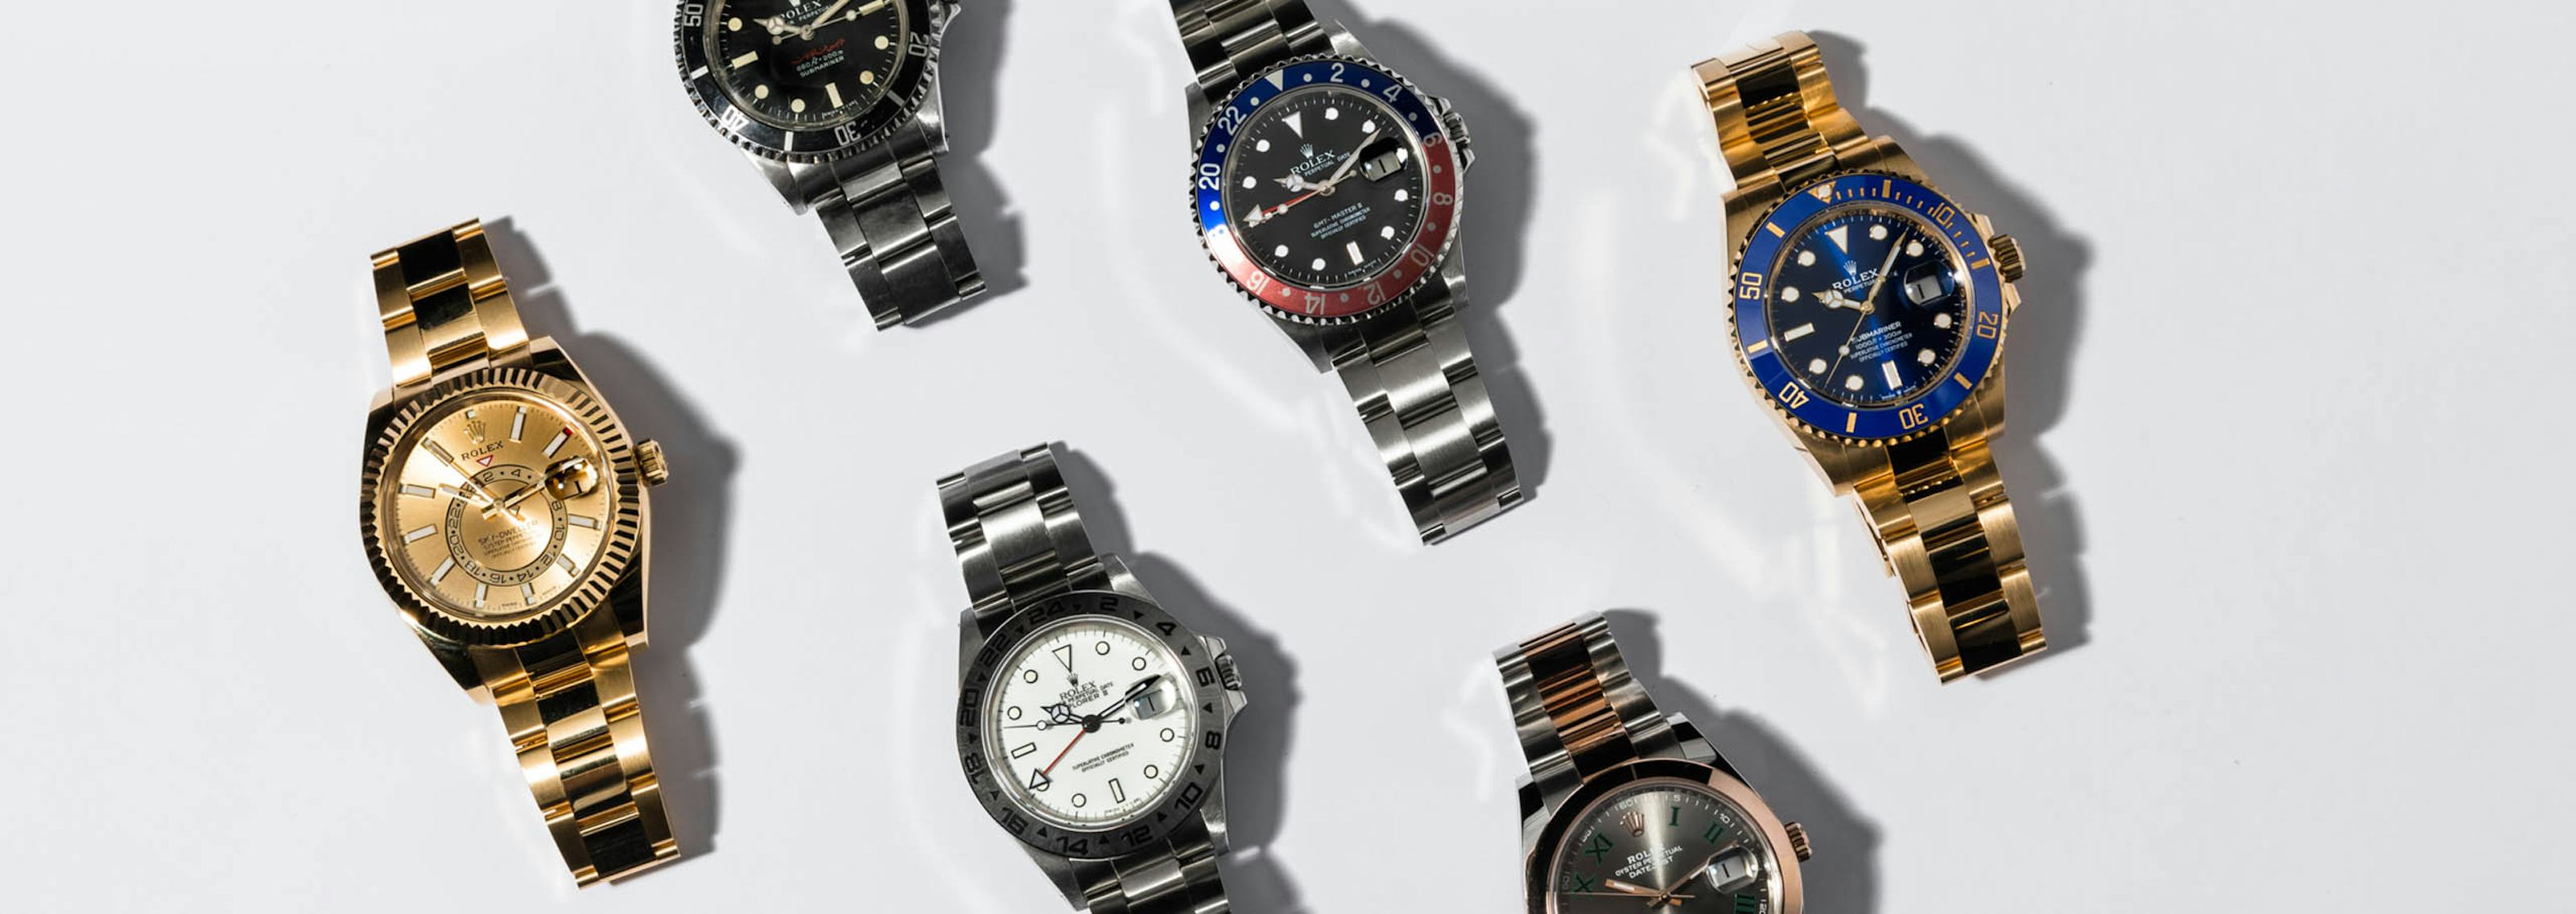 Rolex History: Everything You Need to Know About Rolex Watches